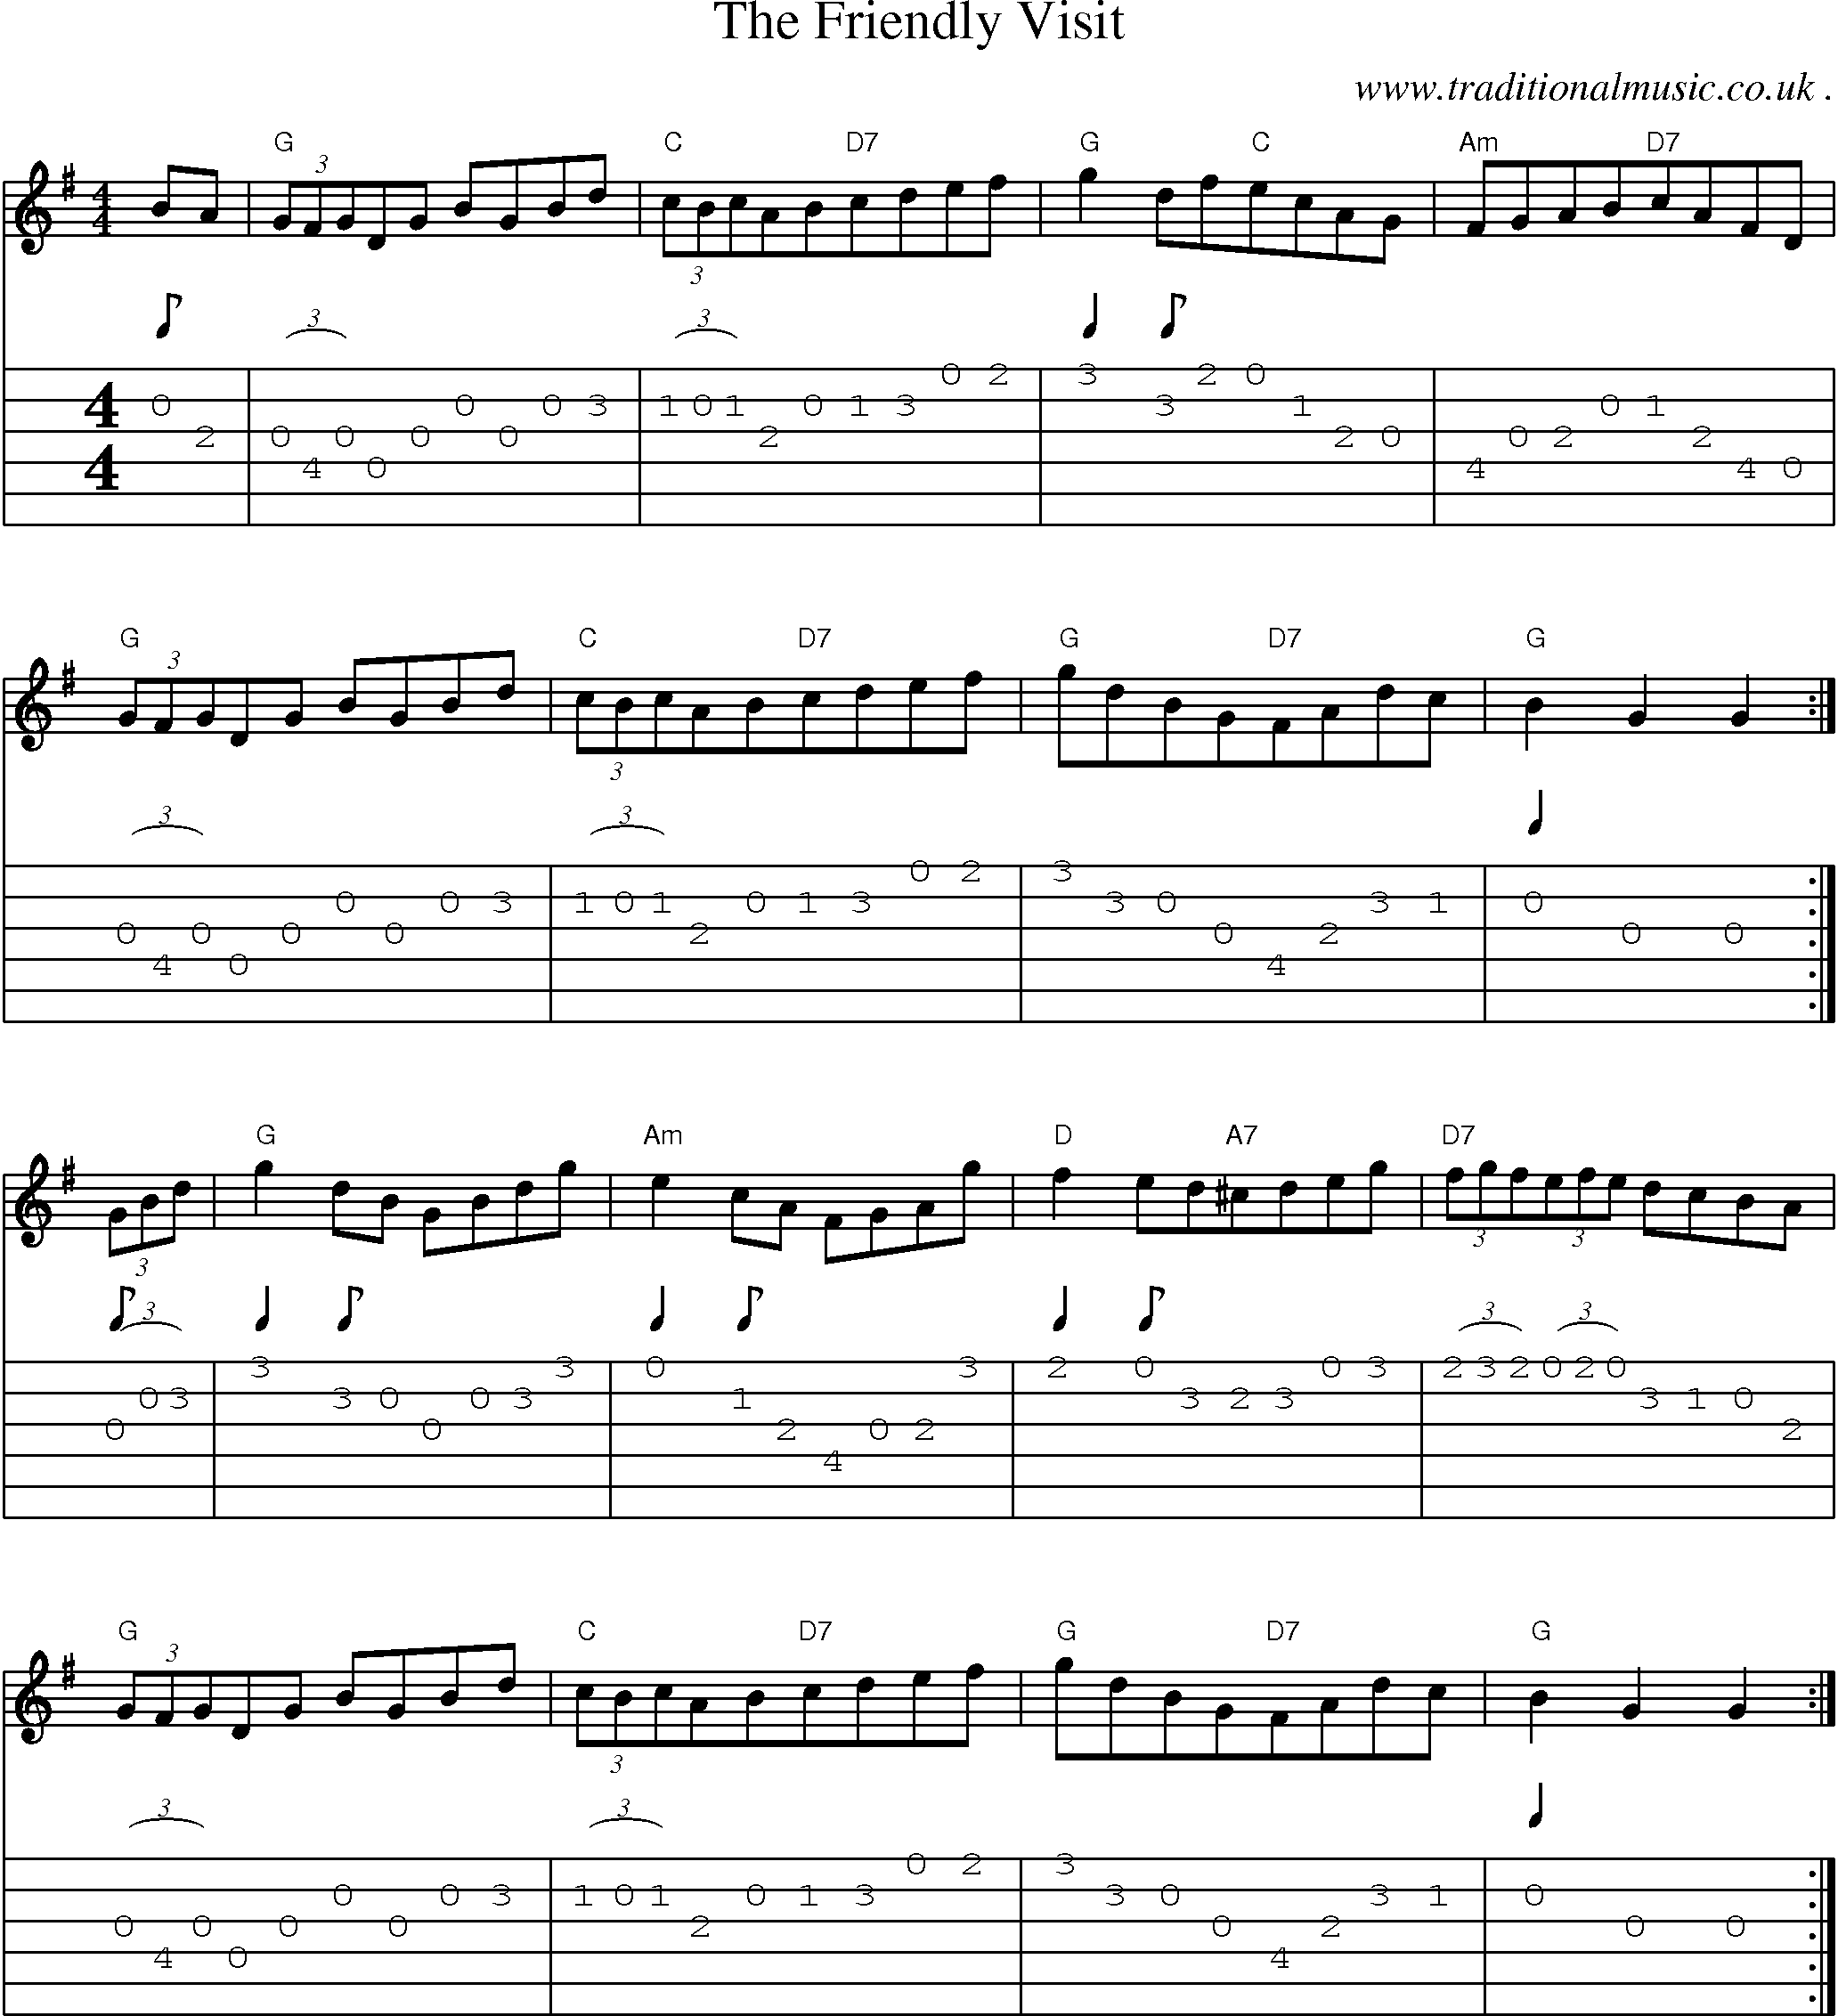 Sheet-Music and Guitar Tabs for The Friendly Visit